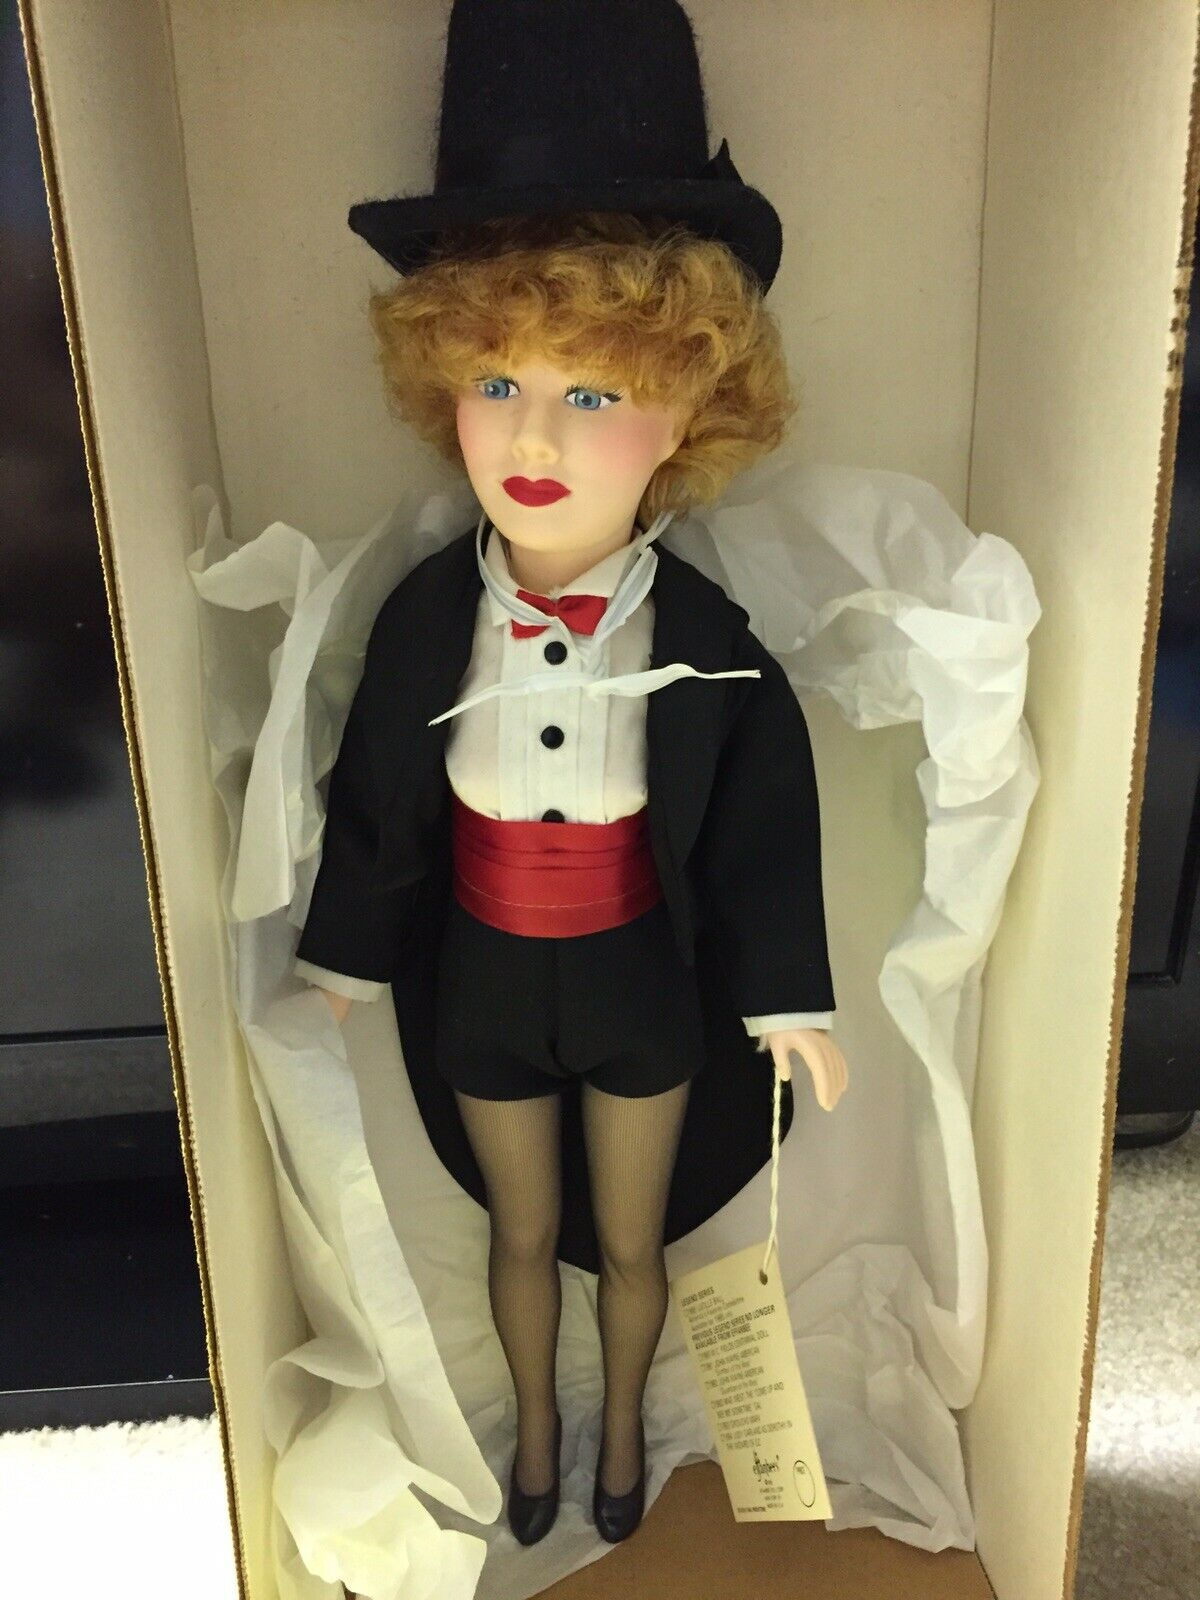 Vintage 1985 Effanbee “lucille Ball” I Love Lucy Doll W/ Box